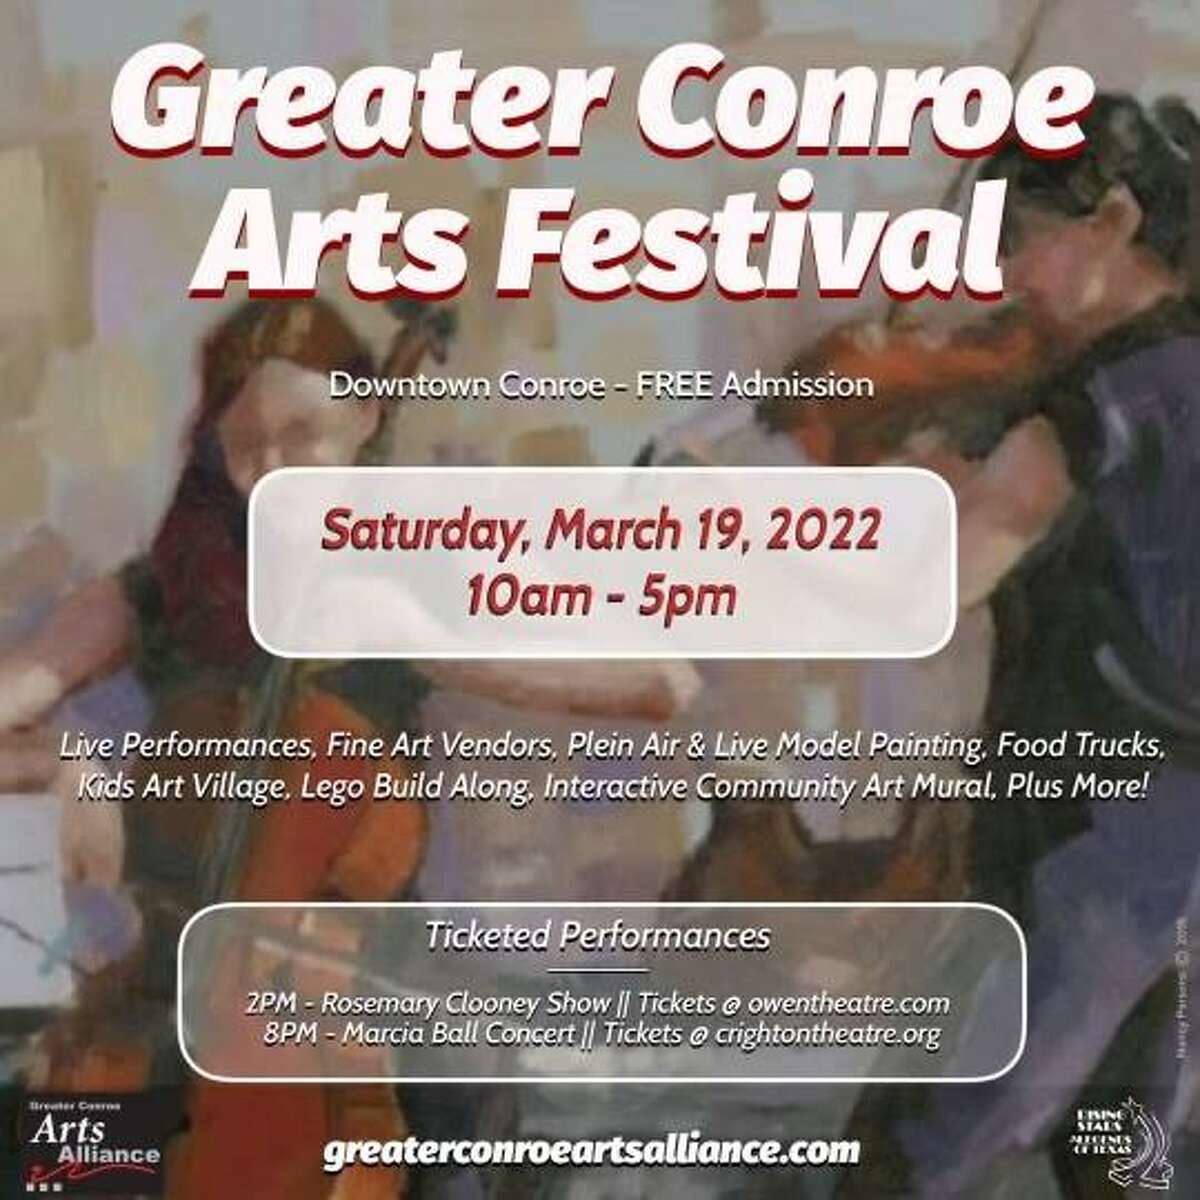 The Greater Conroe Arts Alliance presents the Greater Conroe Arts Festival this March. The one-day free event is Saturday, March 19, from 10 a.m. until 5 p.m. at Founder’s Plaza Park in downtown Conroe with live performance from both members of the organization and many special guests to entertain and bring interactive activities for everyone.